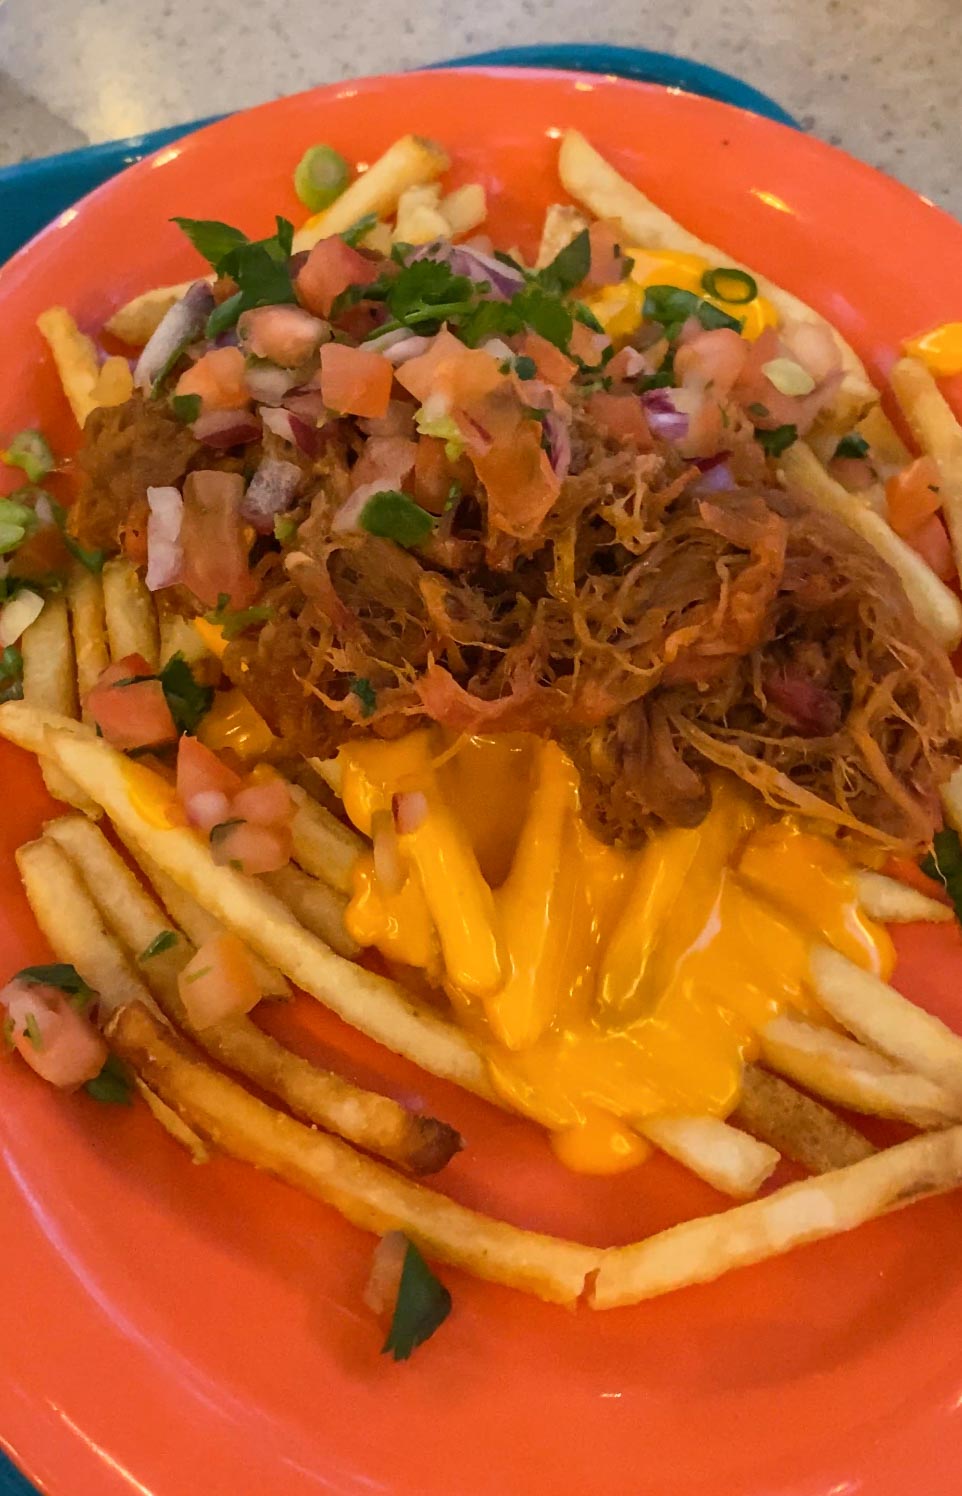 fries topped with cheese and brisket on an orange plate